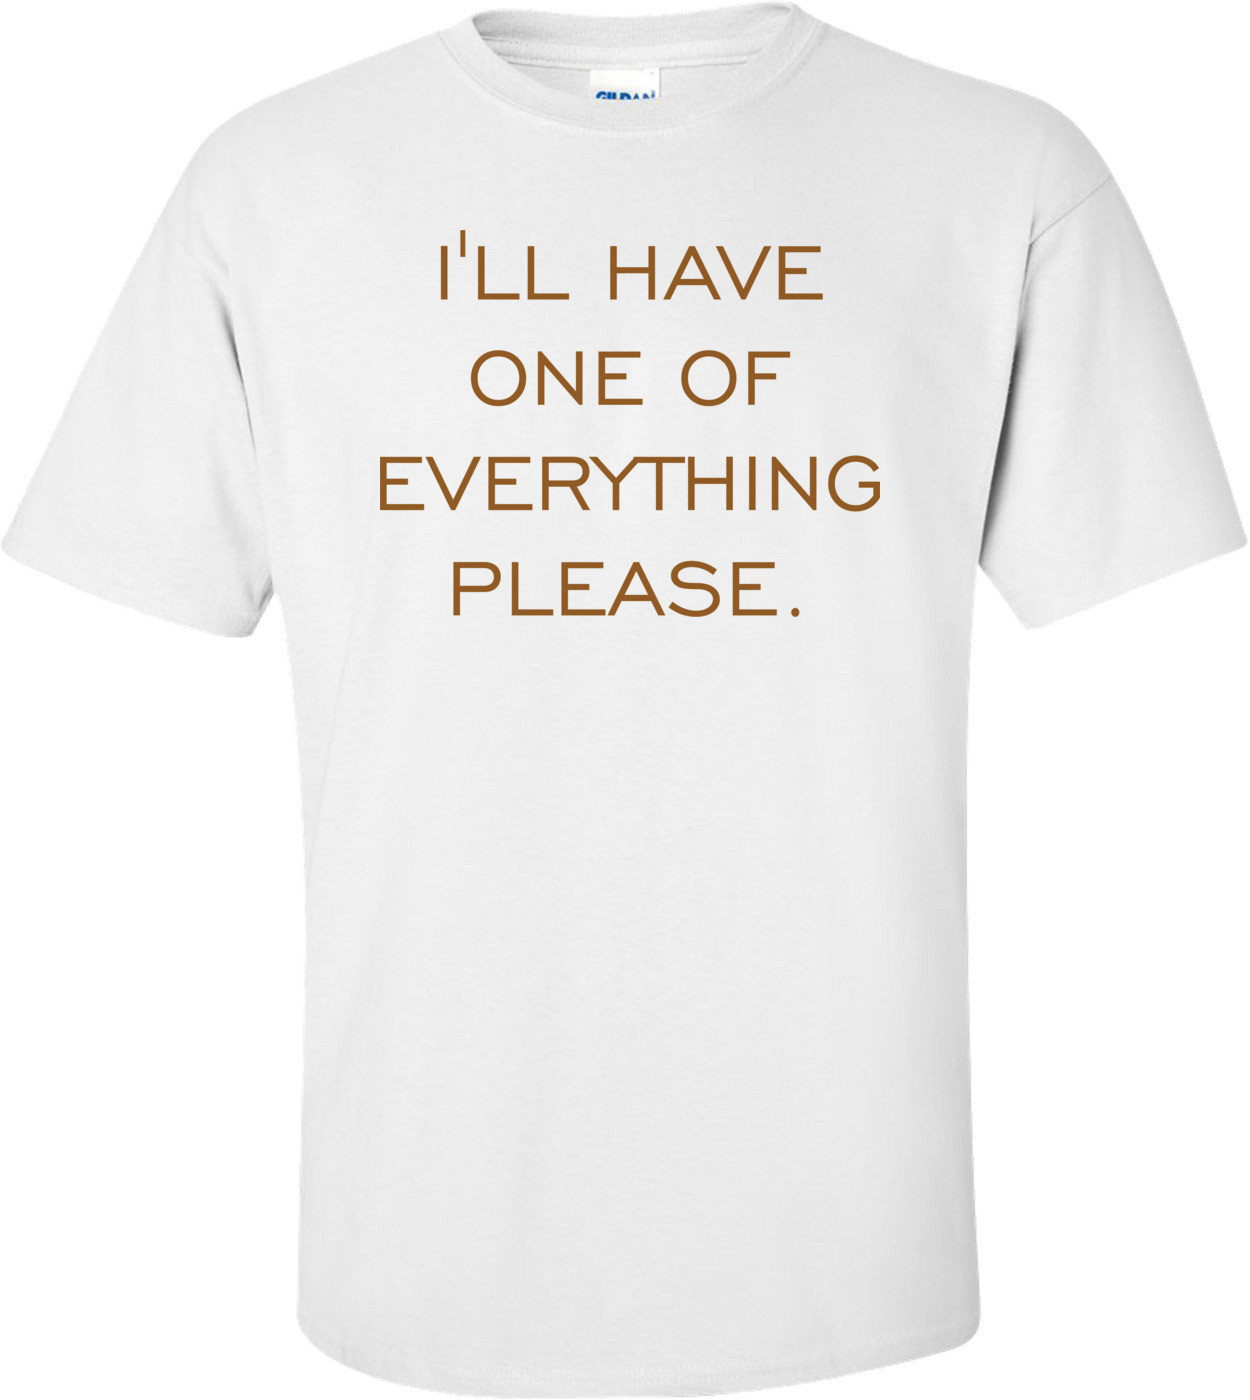 I'LL HAVE ONE OF EVERYTHING PLEASE. Shirt